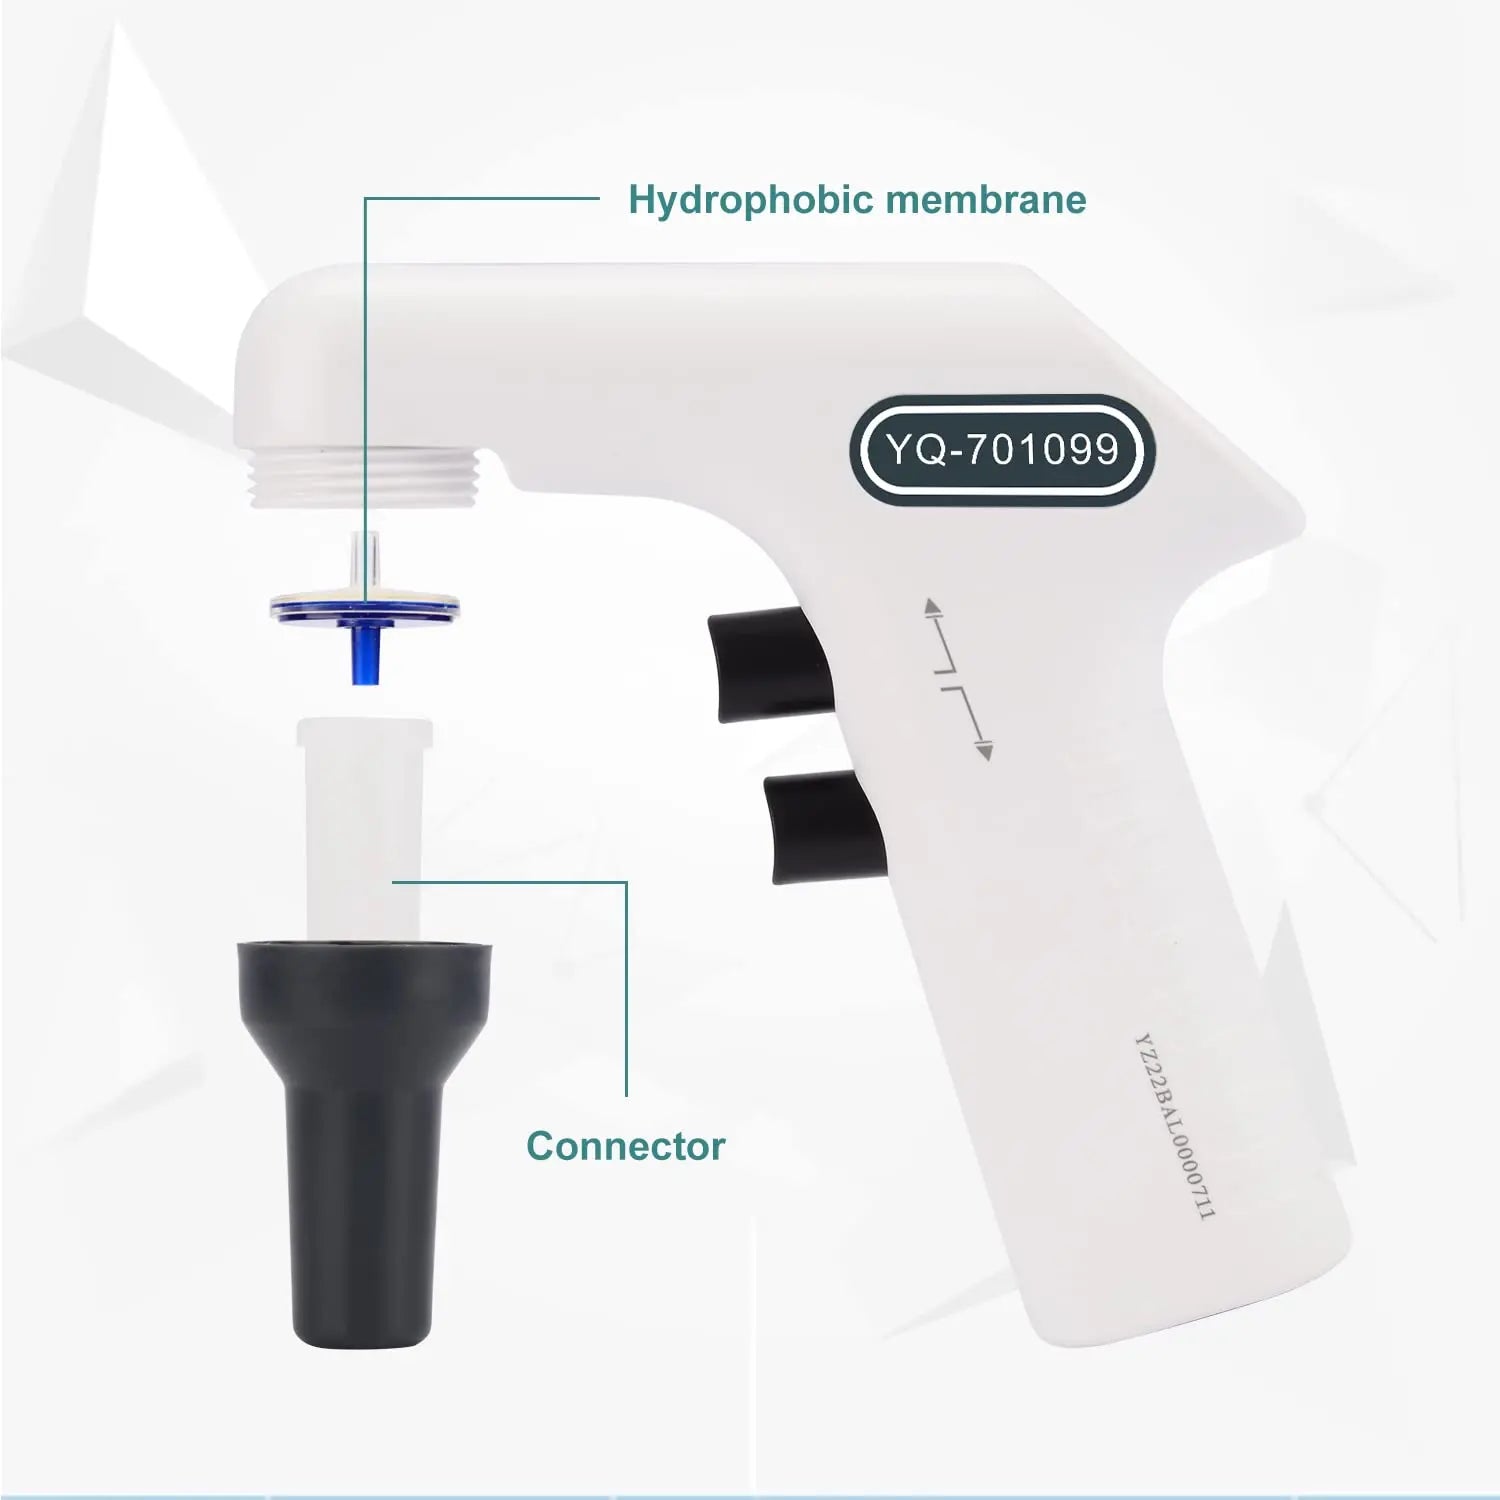 Digital Motorized Pipette Controller for 1-50 ml Pipettes